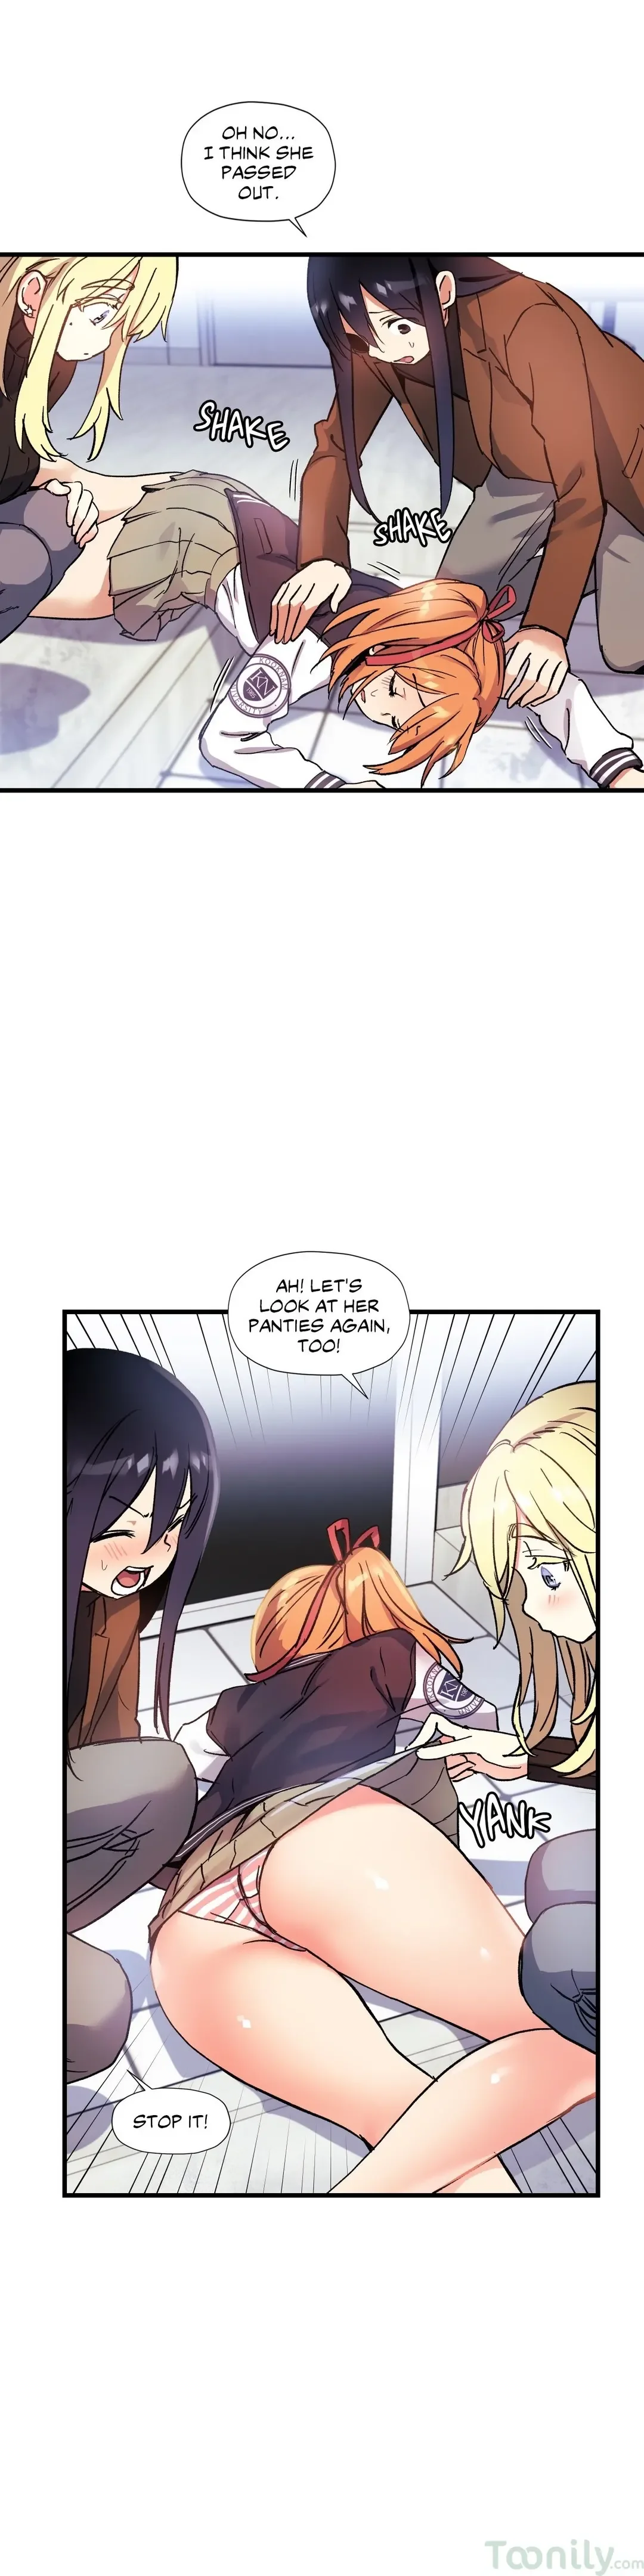 under-observation-my-first-loves-and-i-chap-40-2